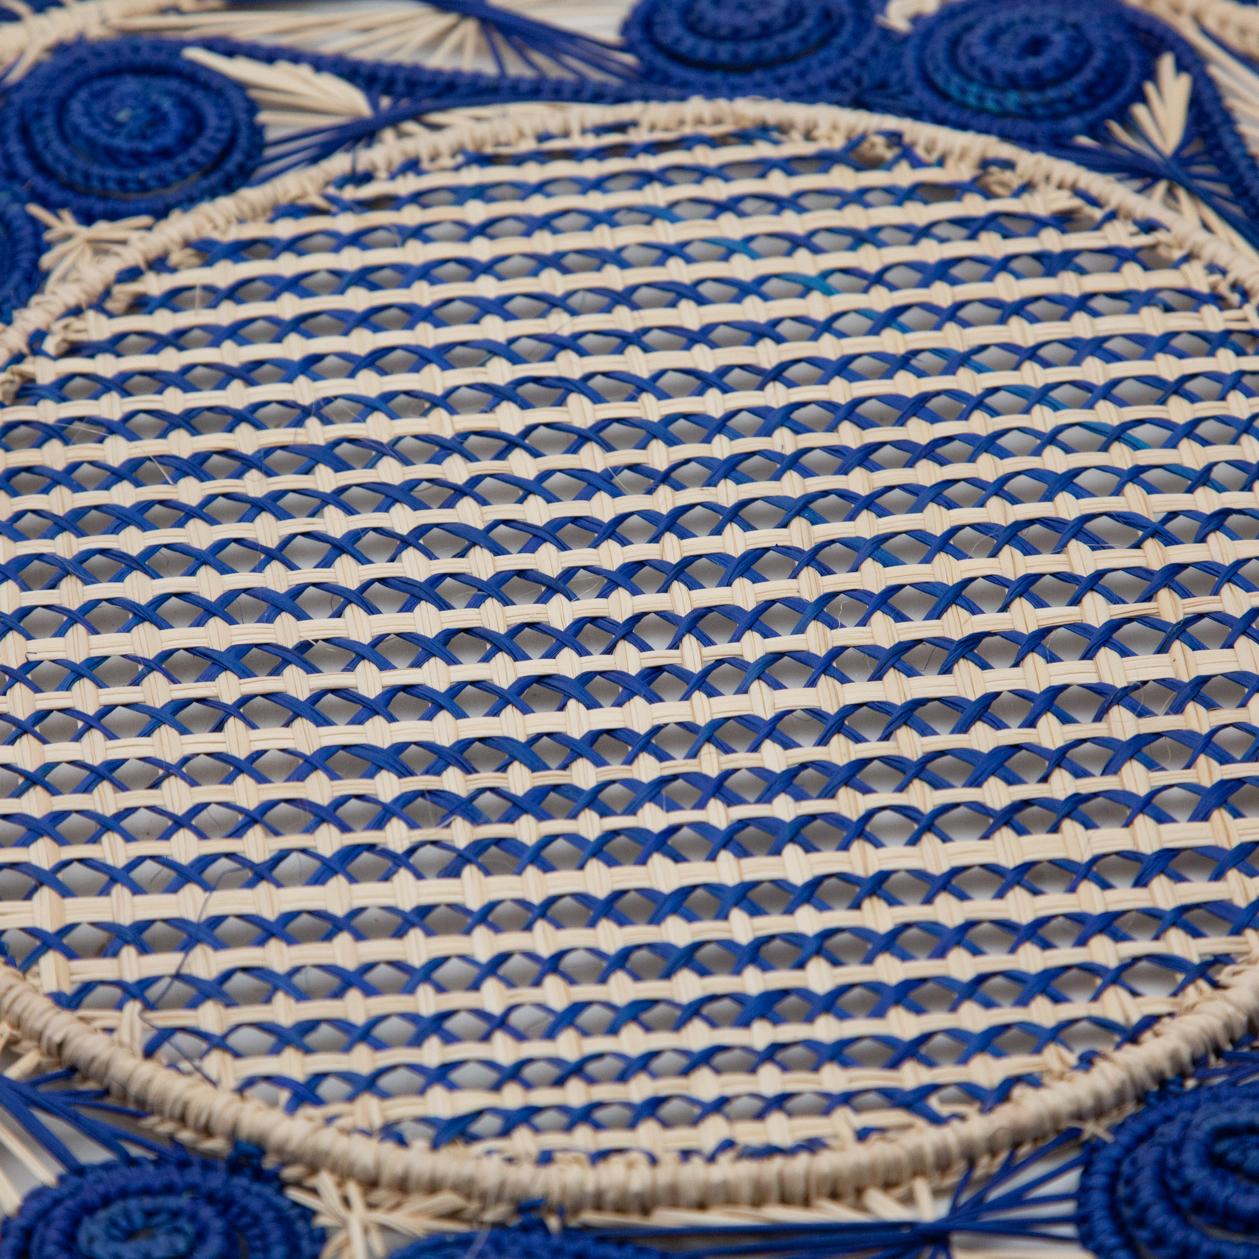 Handwoven Iraca fibre placemats made in Columbia. Set of 8.